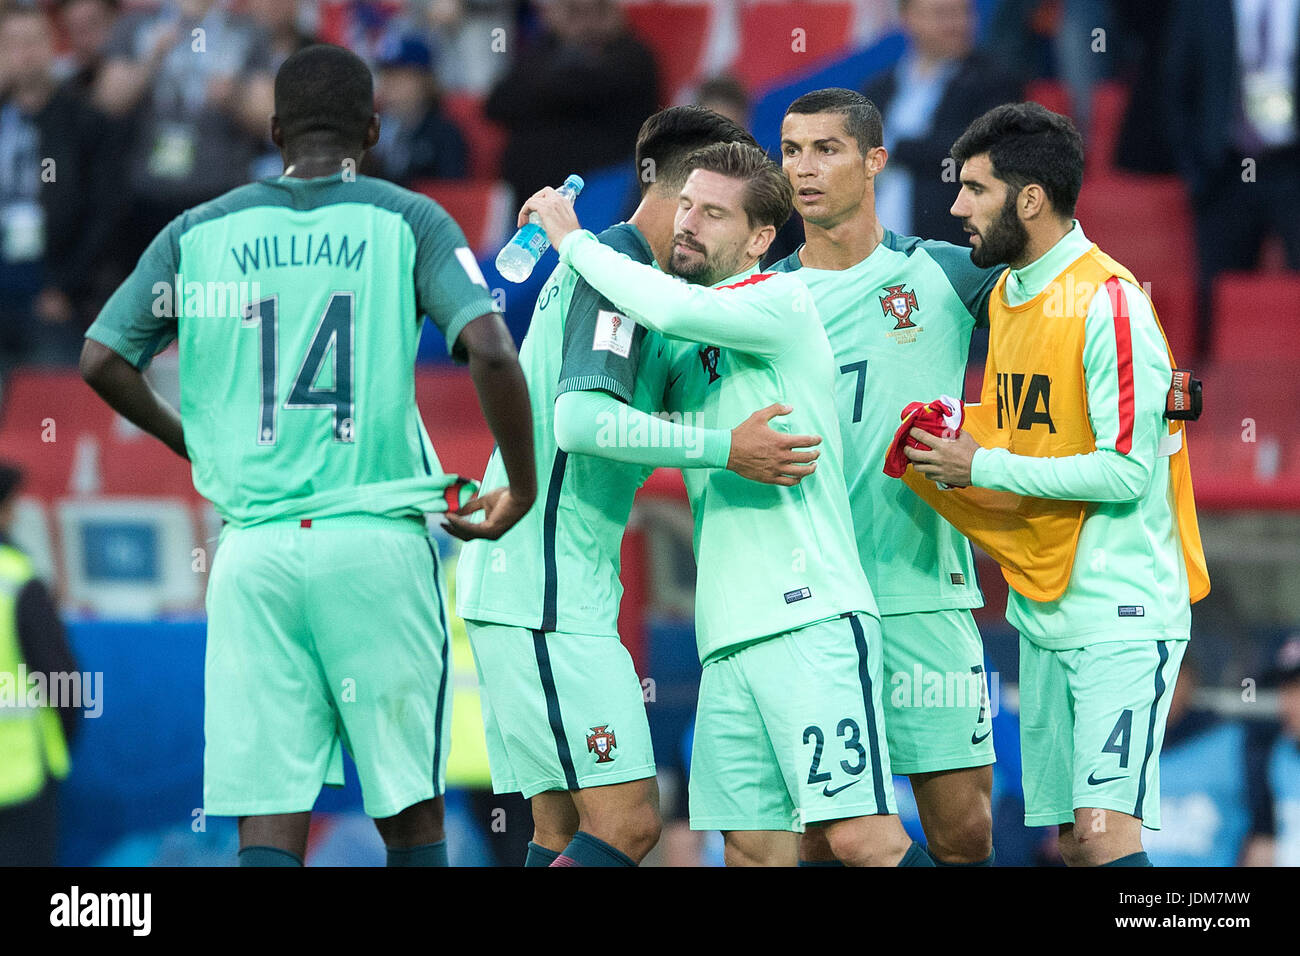 Moscow, Russia. 21st June, 2017. Portugal's William (left to right), Adrian Silva, Cristiano Ronaldo and Luis Neto hug after the preliminary stage group A match between Russia and Portugal in the Spartak Stadium in Moscow, Russia, 21 June 2017. Photo: Marius Becker/dpa/Alamy Live News Stock Photo